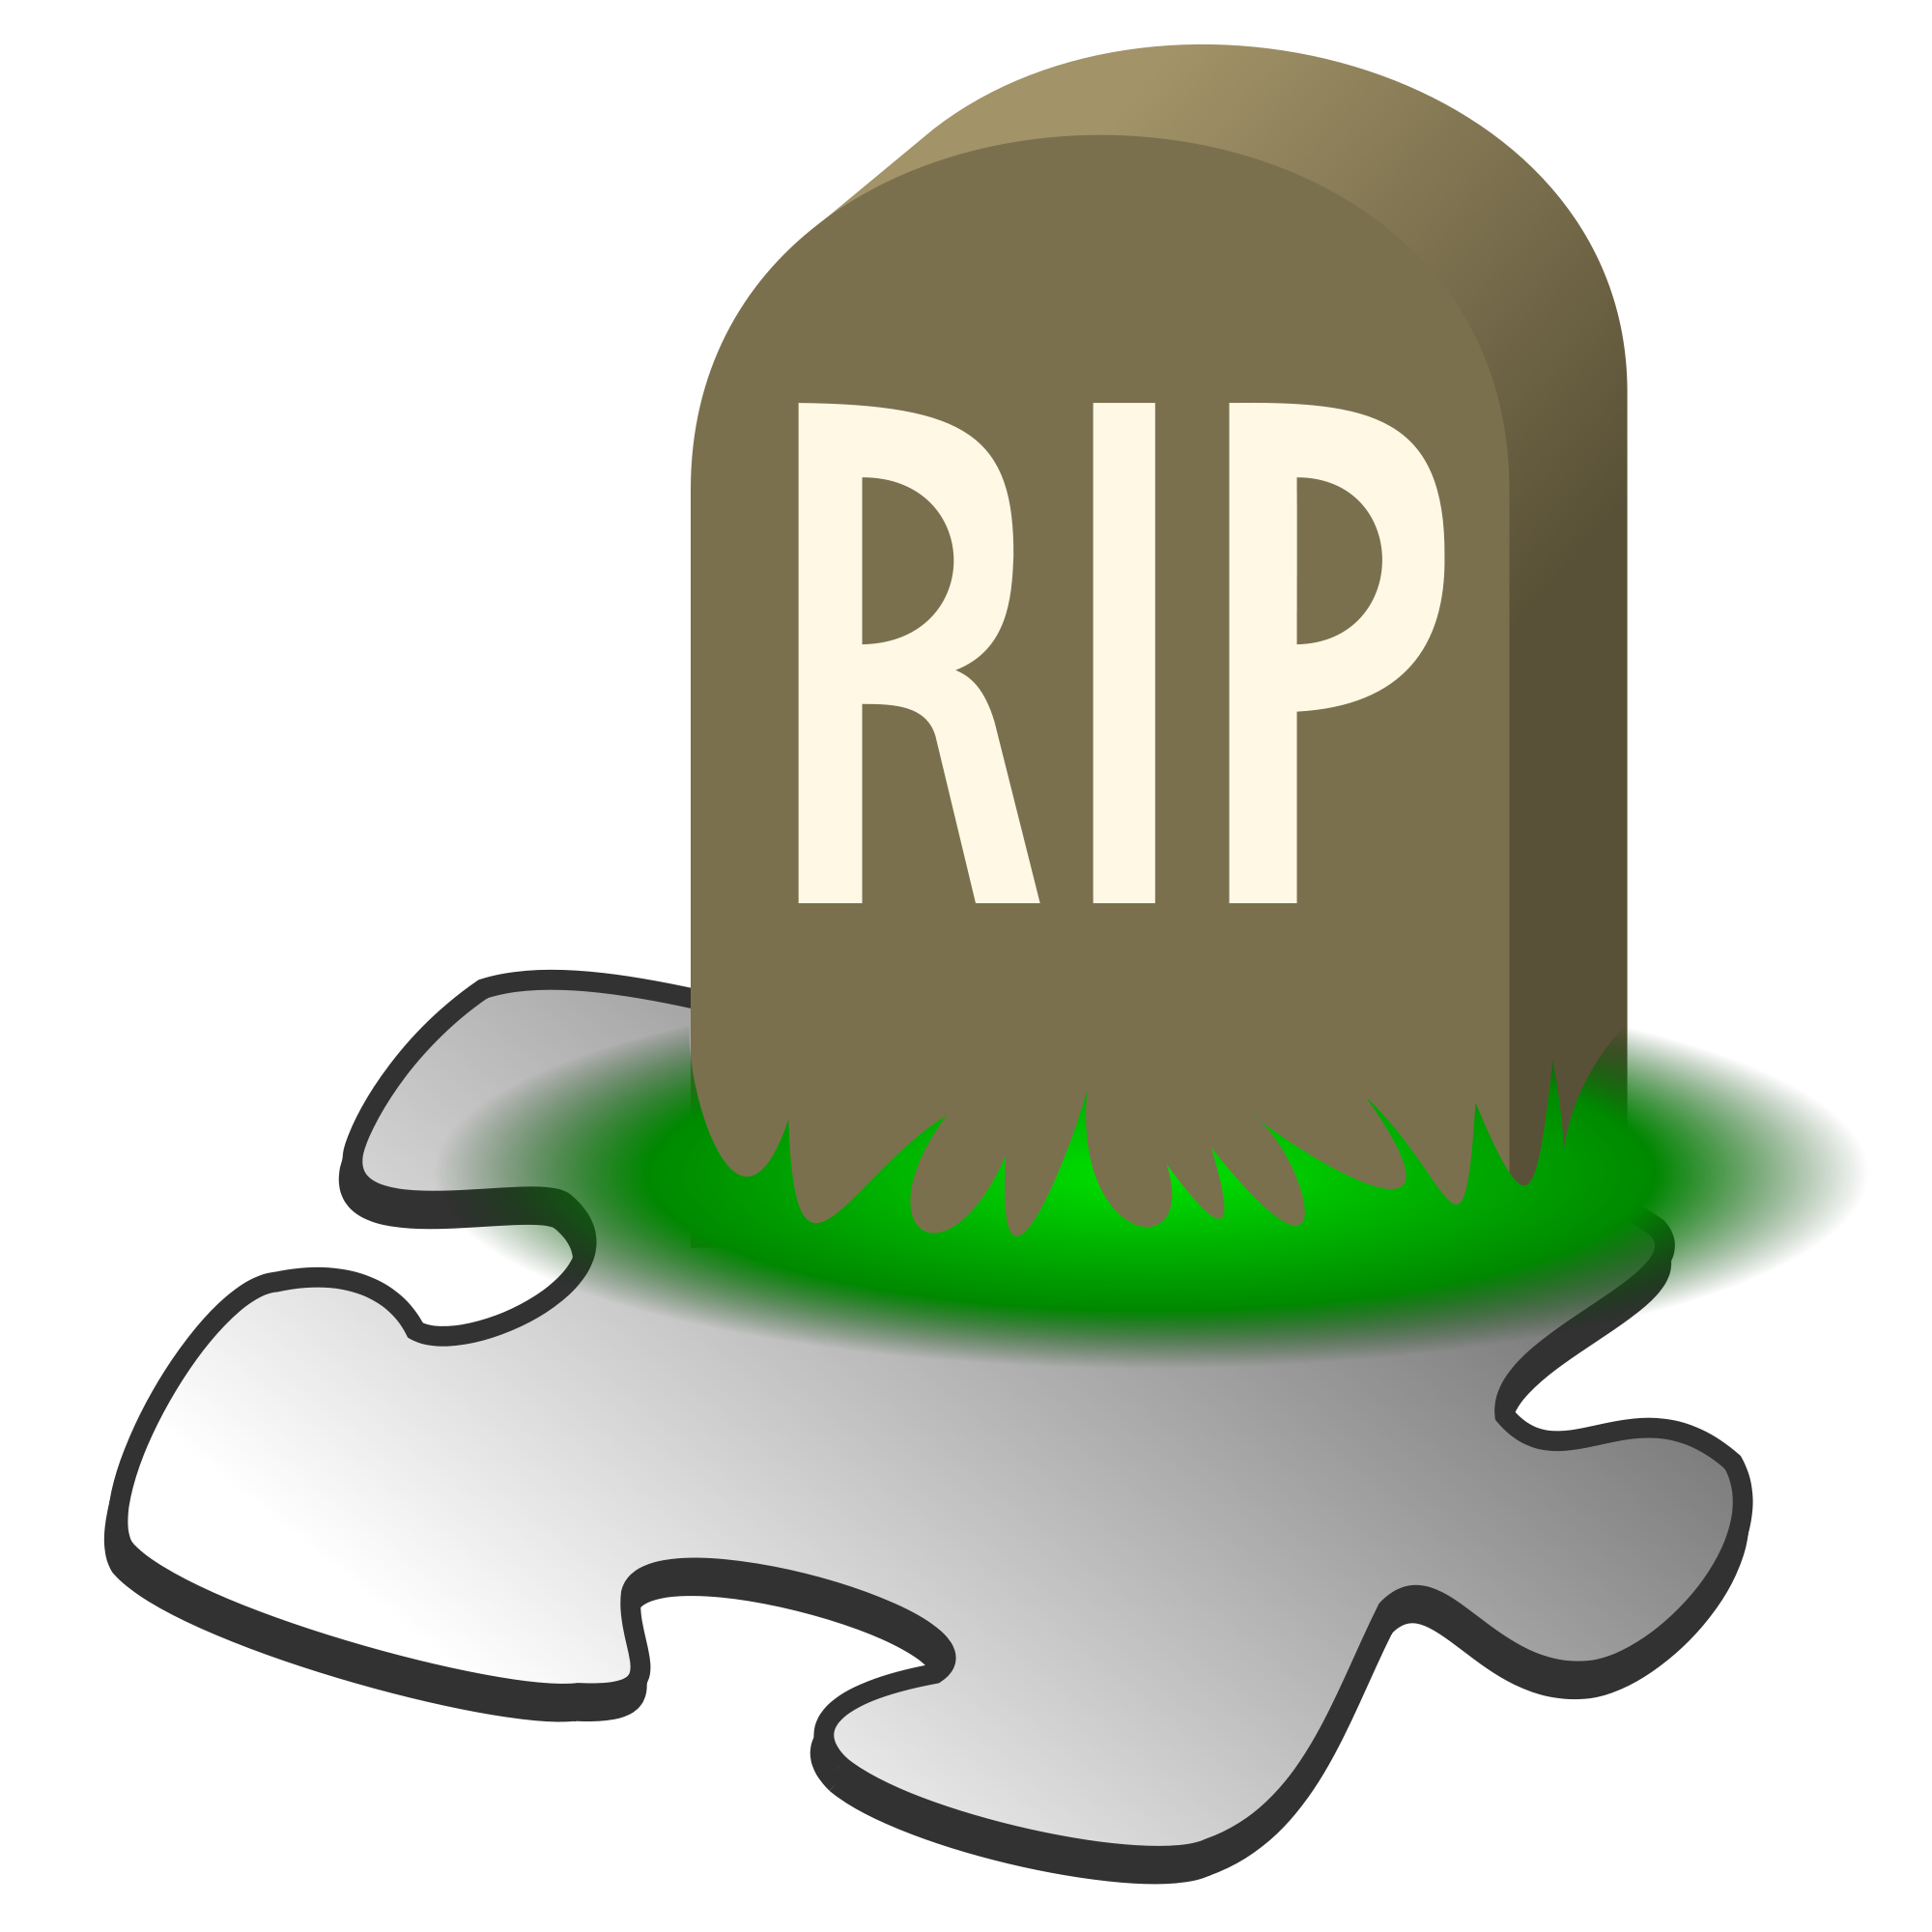 Cemetery svg #19, Download drawings